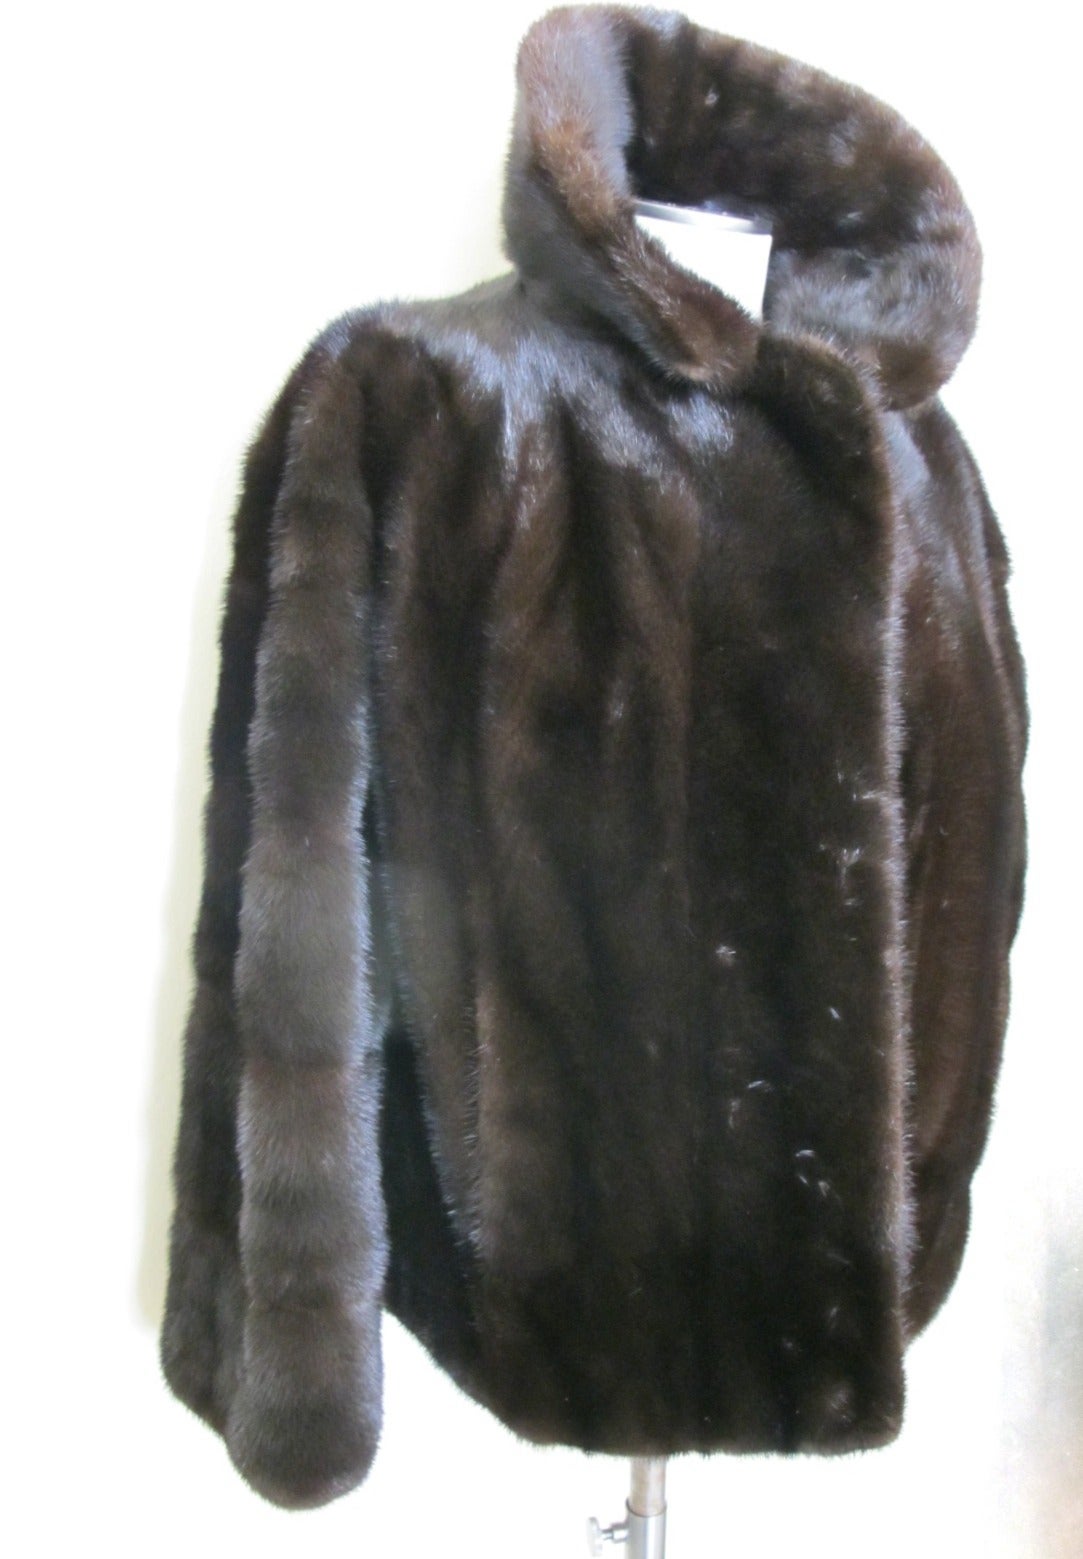 Female let out-full-hair-up Ranch Mink Jacket. Retails in 2014 for $25,000.00

There are 2 front pockets and two six inch slits of the side of the jacket. 
Sleeve Length measures 22 inches. Shoulder to shoulder measures 16 inches.
Monogram on